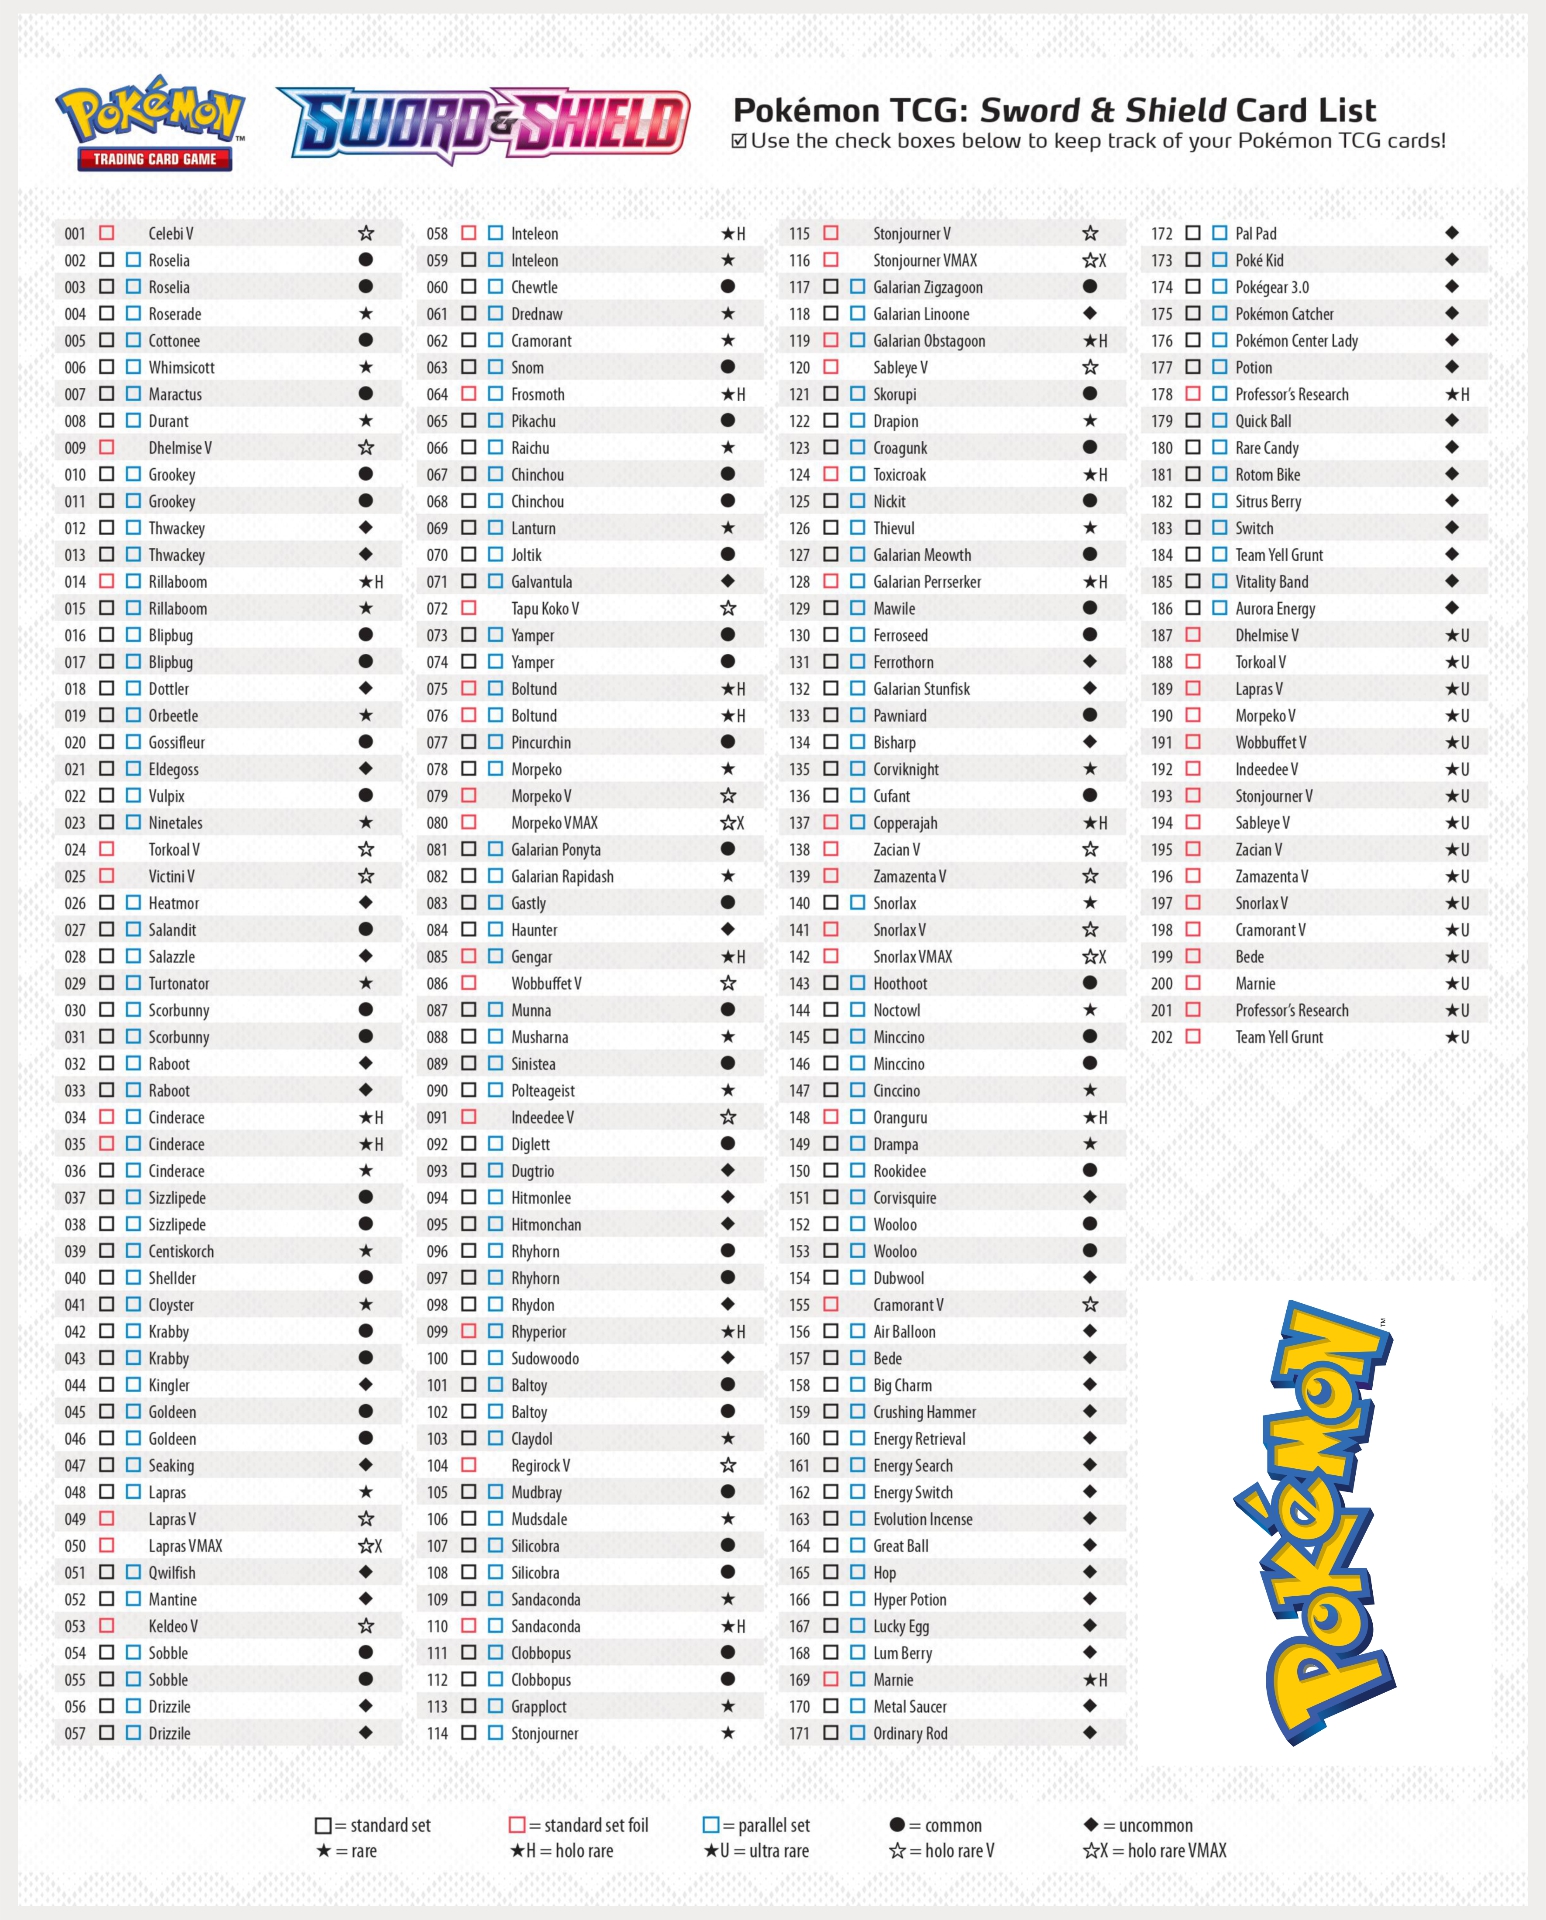 8-best-images-of-pokemon-card-checklist-printable-list-of-all-pokemon